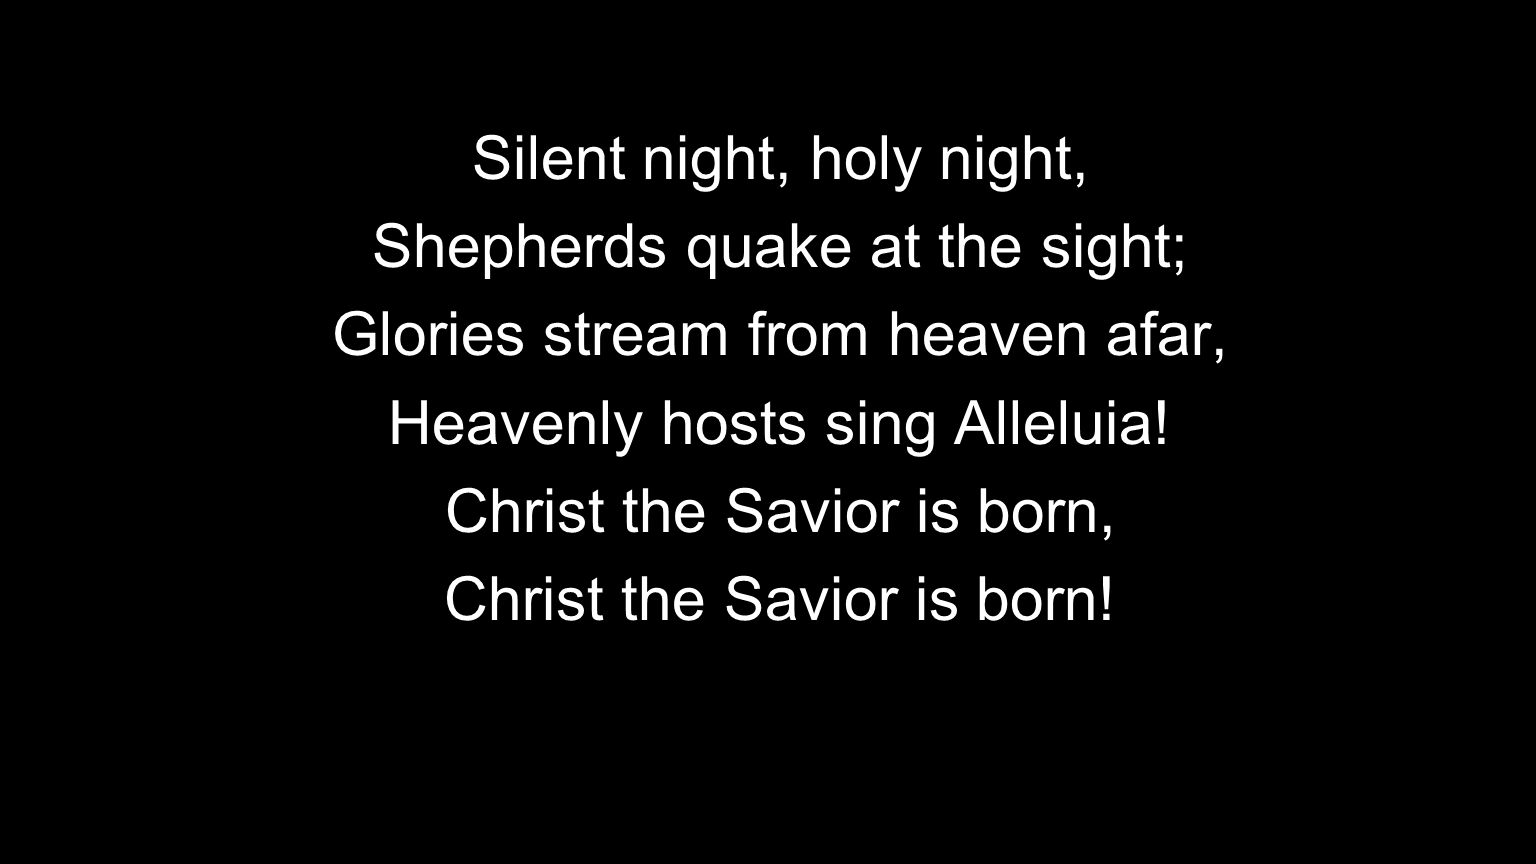 Silent night, holy night, Shepherds quake at the sight; Glories stream from heaven afar, Heavenly hosts sing Alleluia.